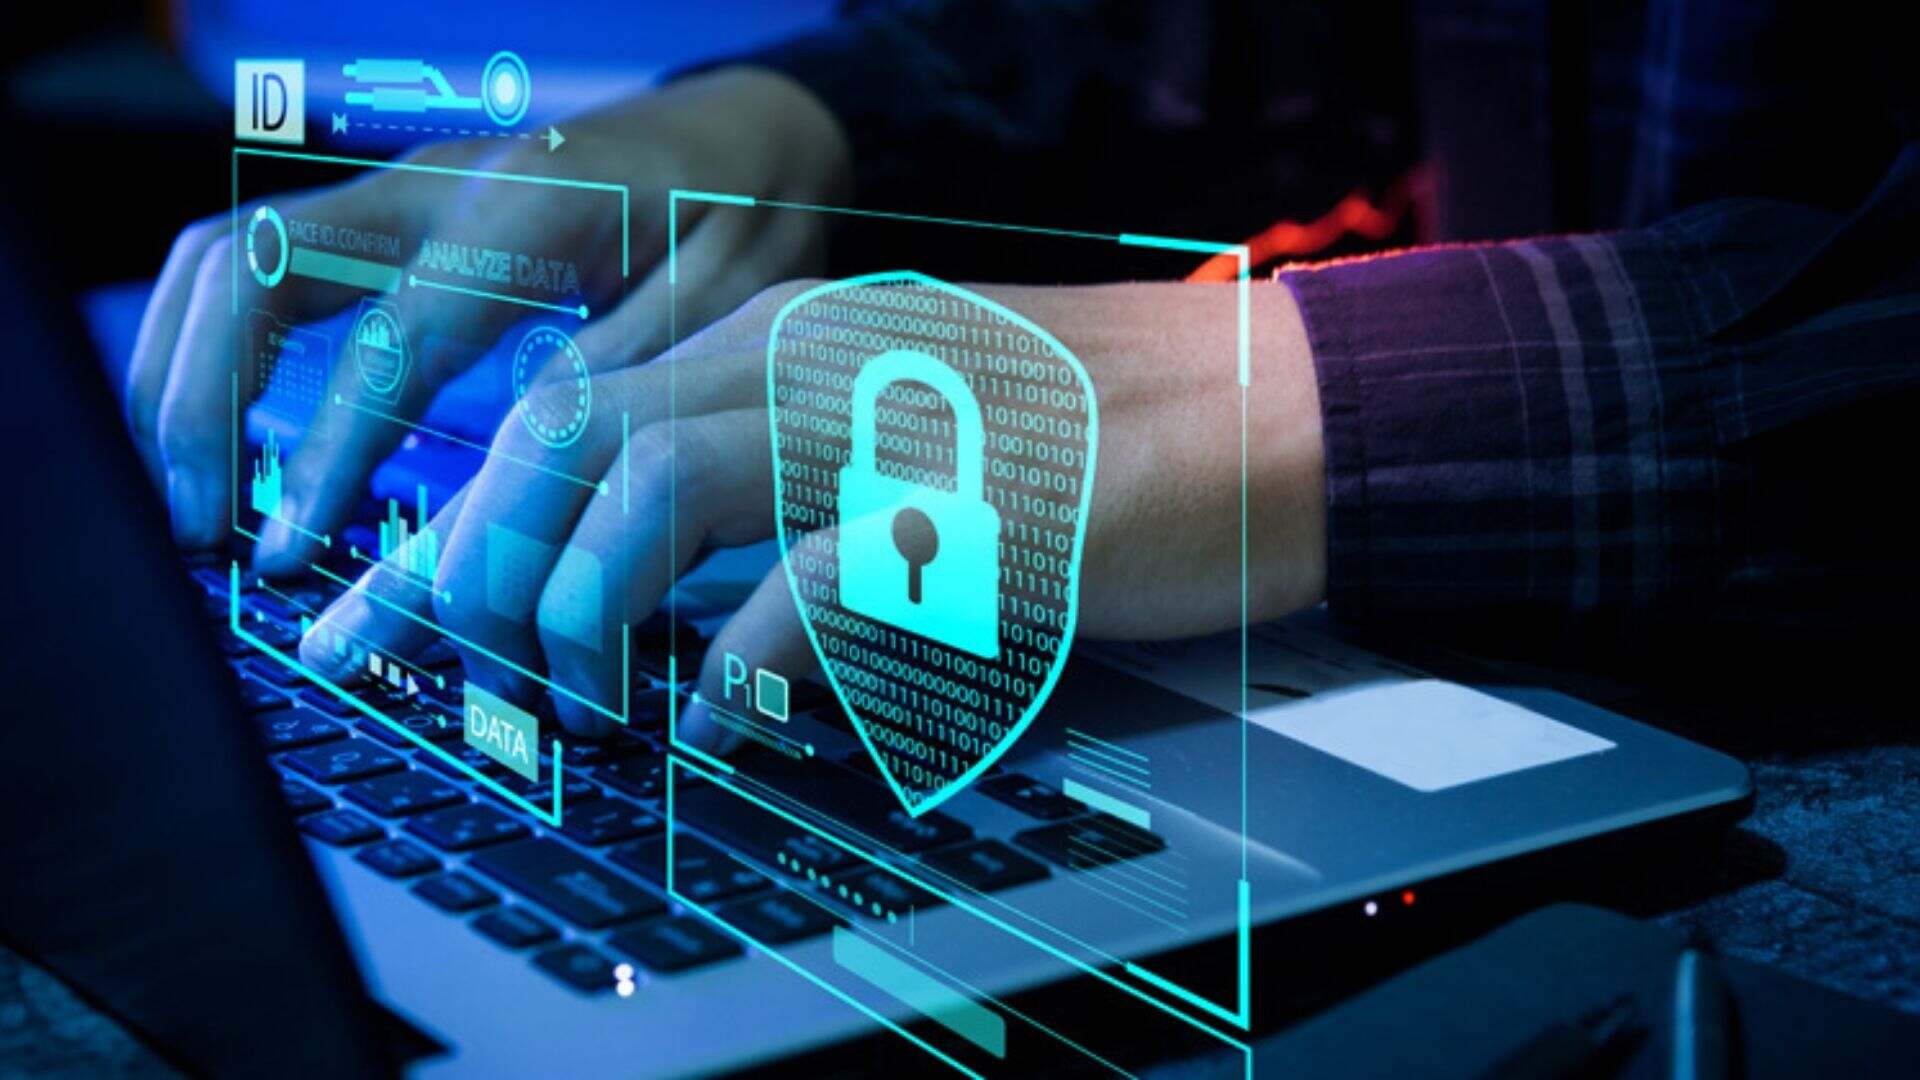 This article will explain blockchain in cyber security, its advantages and disadvantages, how it is used, and some of the best projects in the field.